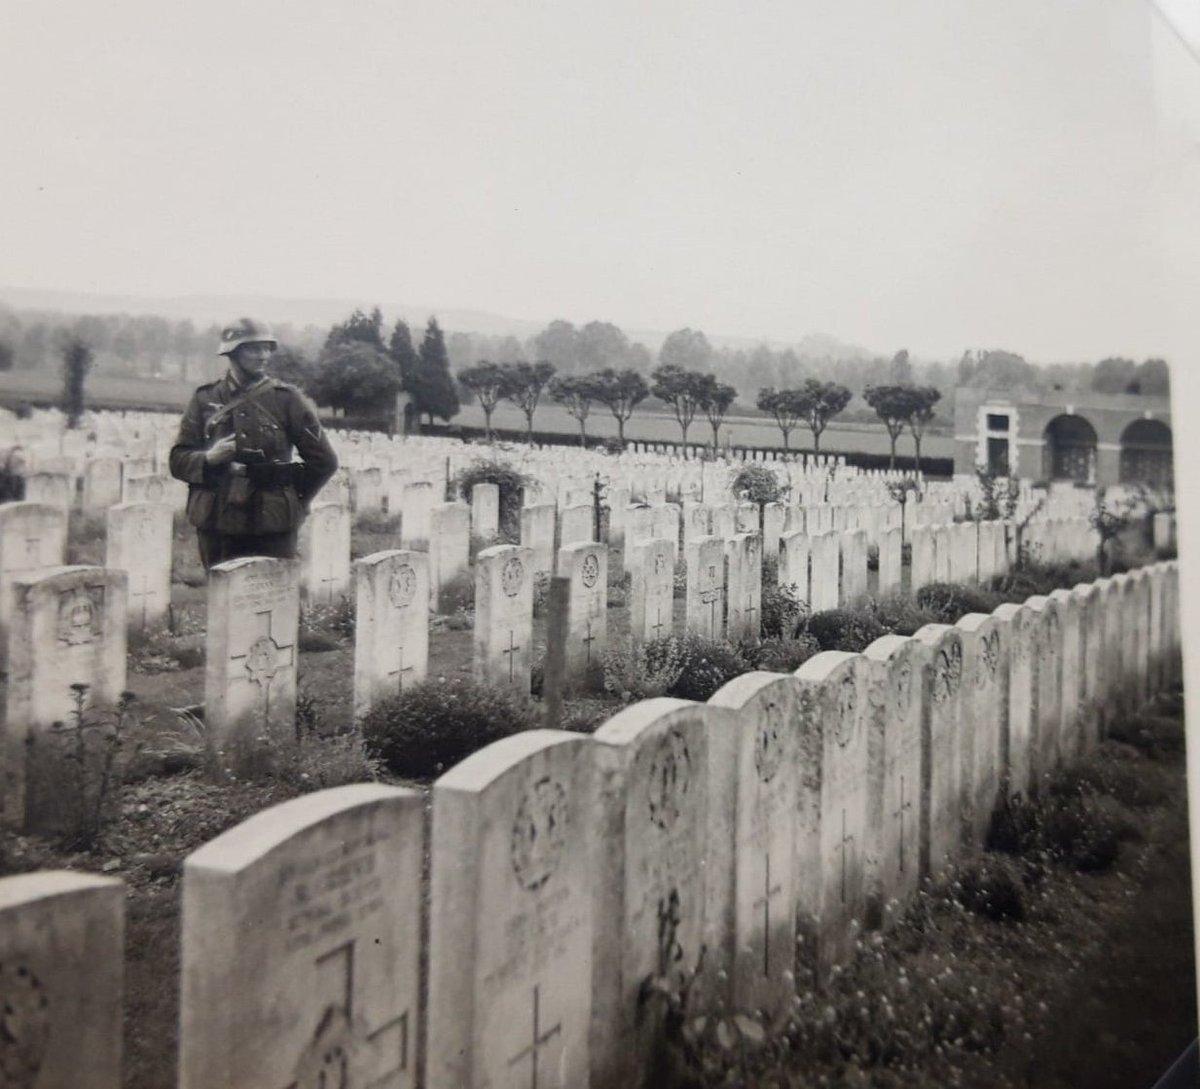 Unknown location, clearly a CWGC cemetery. Shot is out of focus sadly.